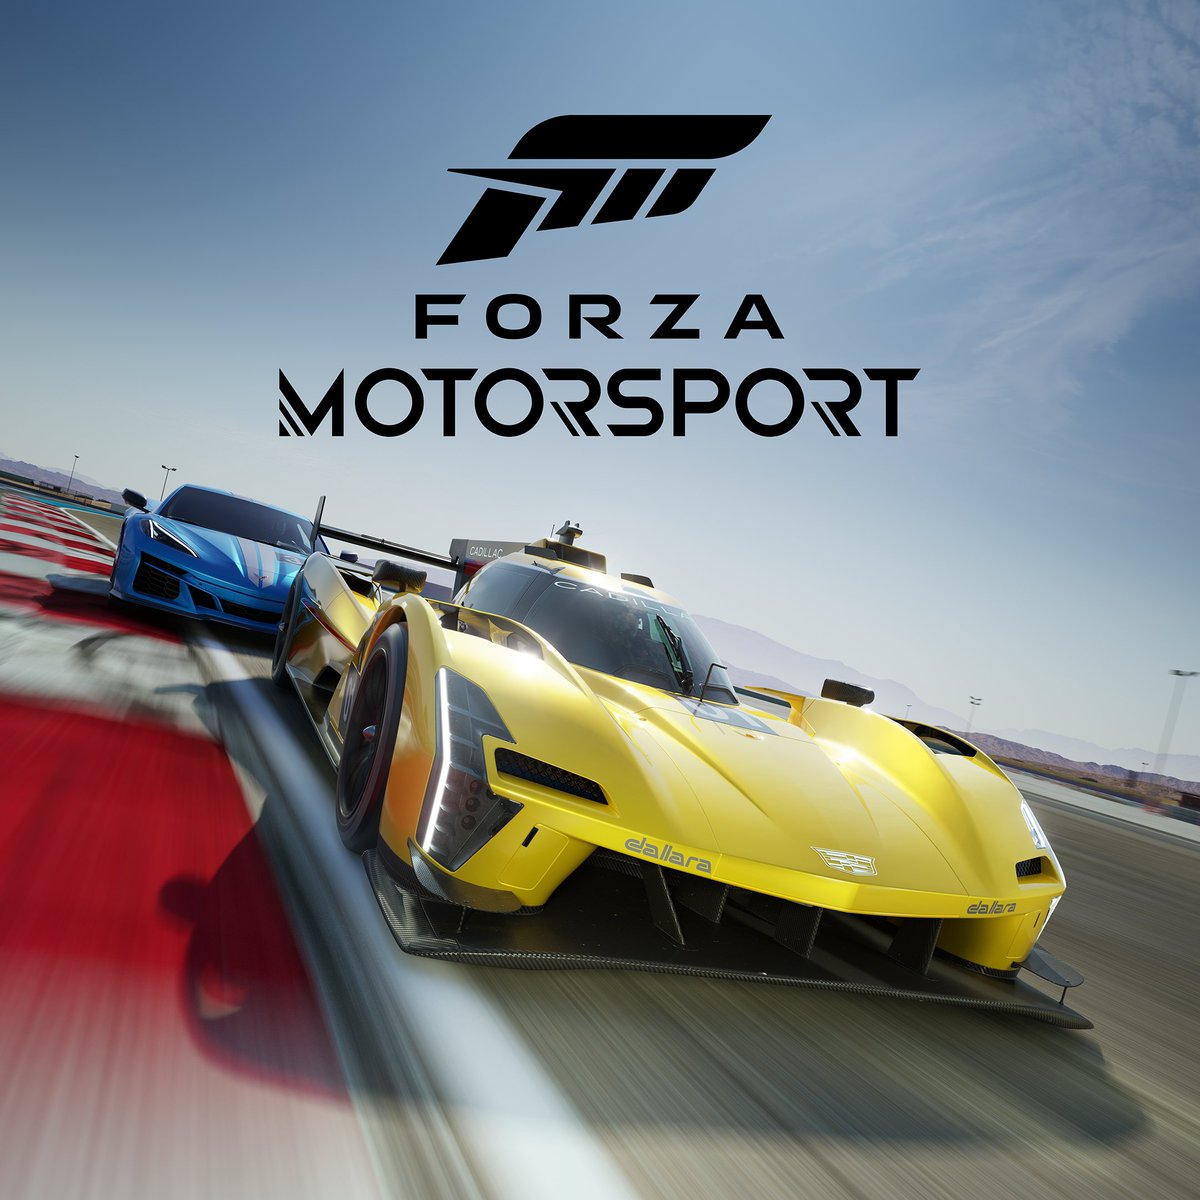 We can’t wait for everyone to experience #ForzaMotorsport on October 10!

Hit the blog for new details on our cover cars, pre-order availability and a list of cars and tracks that we showed today 👇

🏁 forza.net/news/forza-mot…